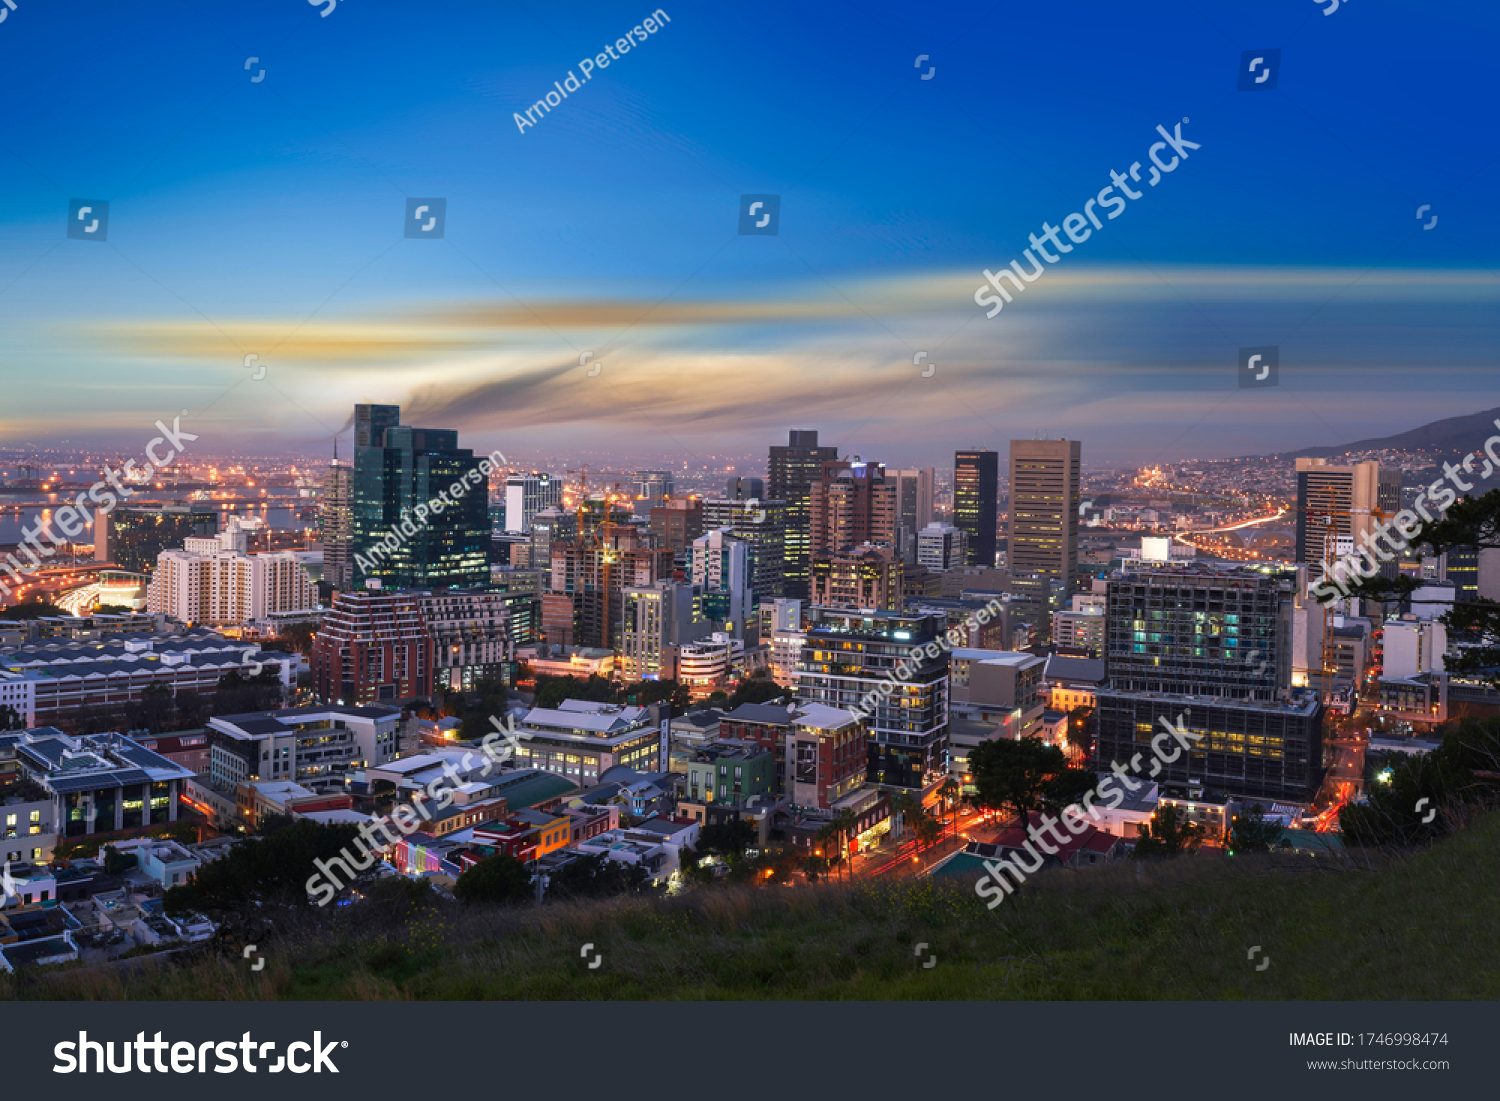 Cape Town city CBD skylines at night just after sunset #1746998474